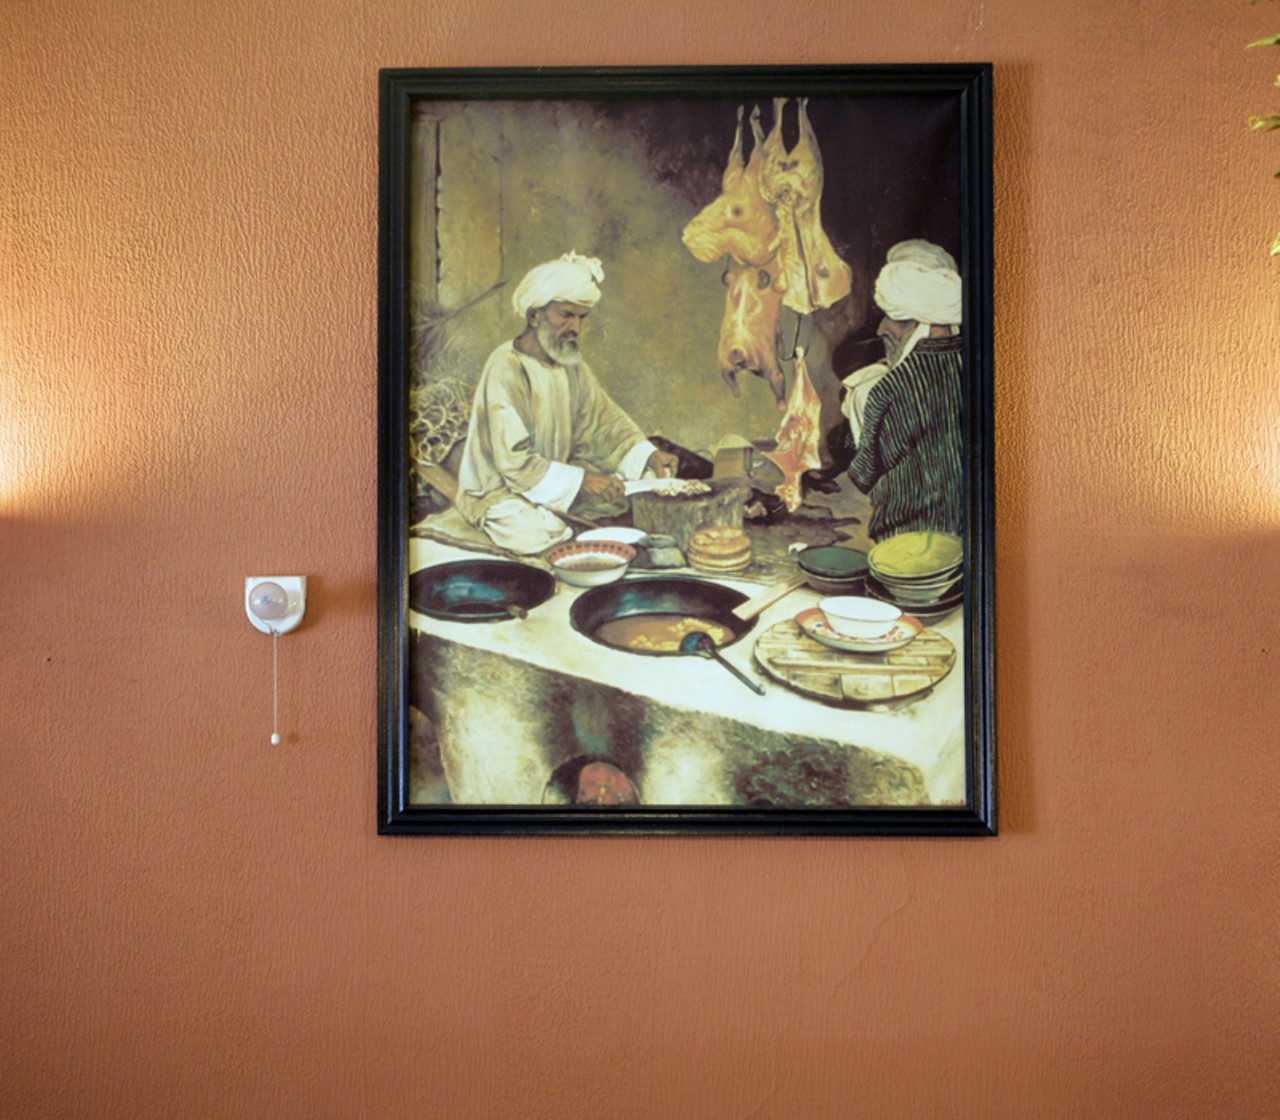 An Afghan painting that adorns the wall.